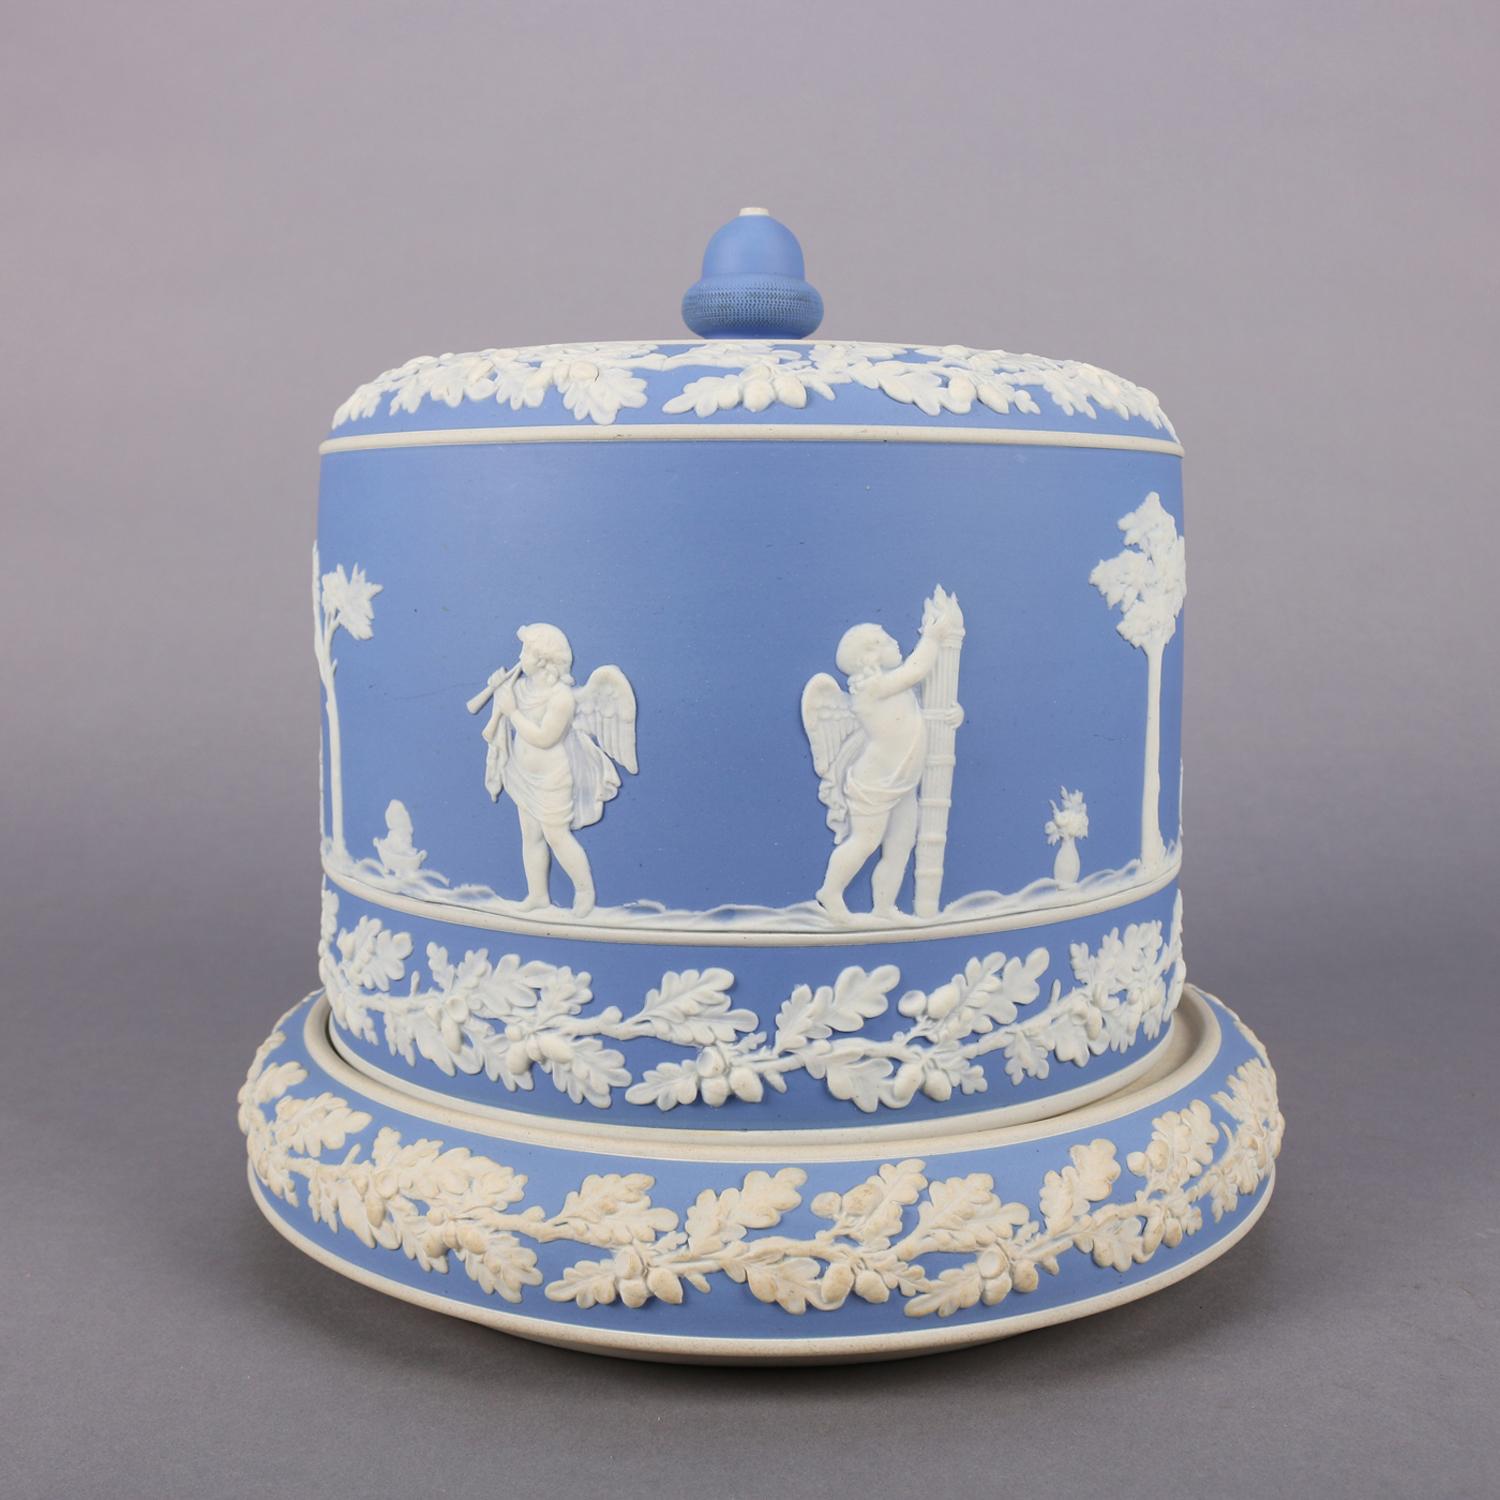 Antique English Wedgwood Jasperware porcelain cheese keeper in blue features unglazed stoneware encircled by classical base-relief scenes and oak leaf garland, includes cheese plate with cylindrical dome with acorn finial, 19th century

Measures: